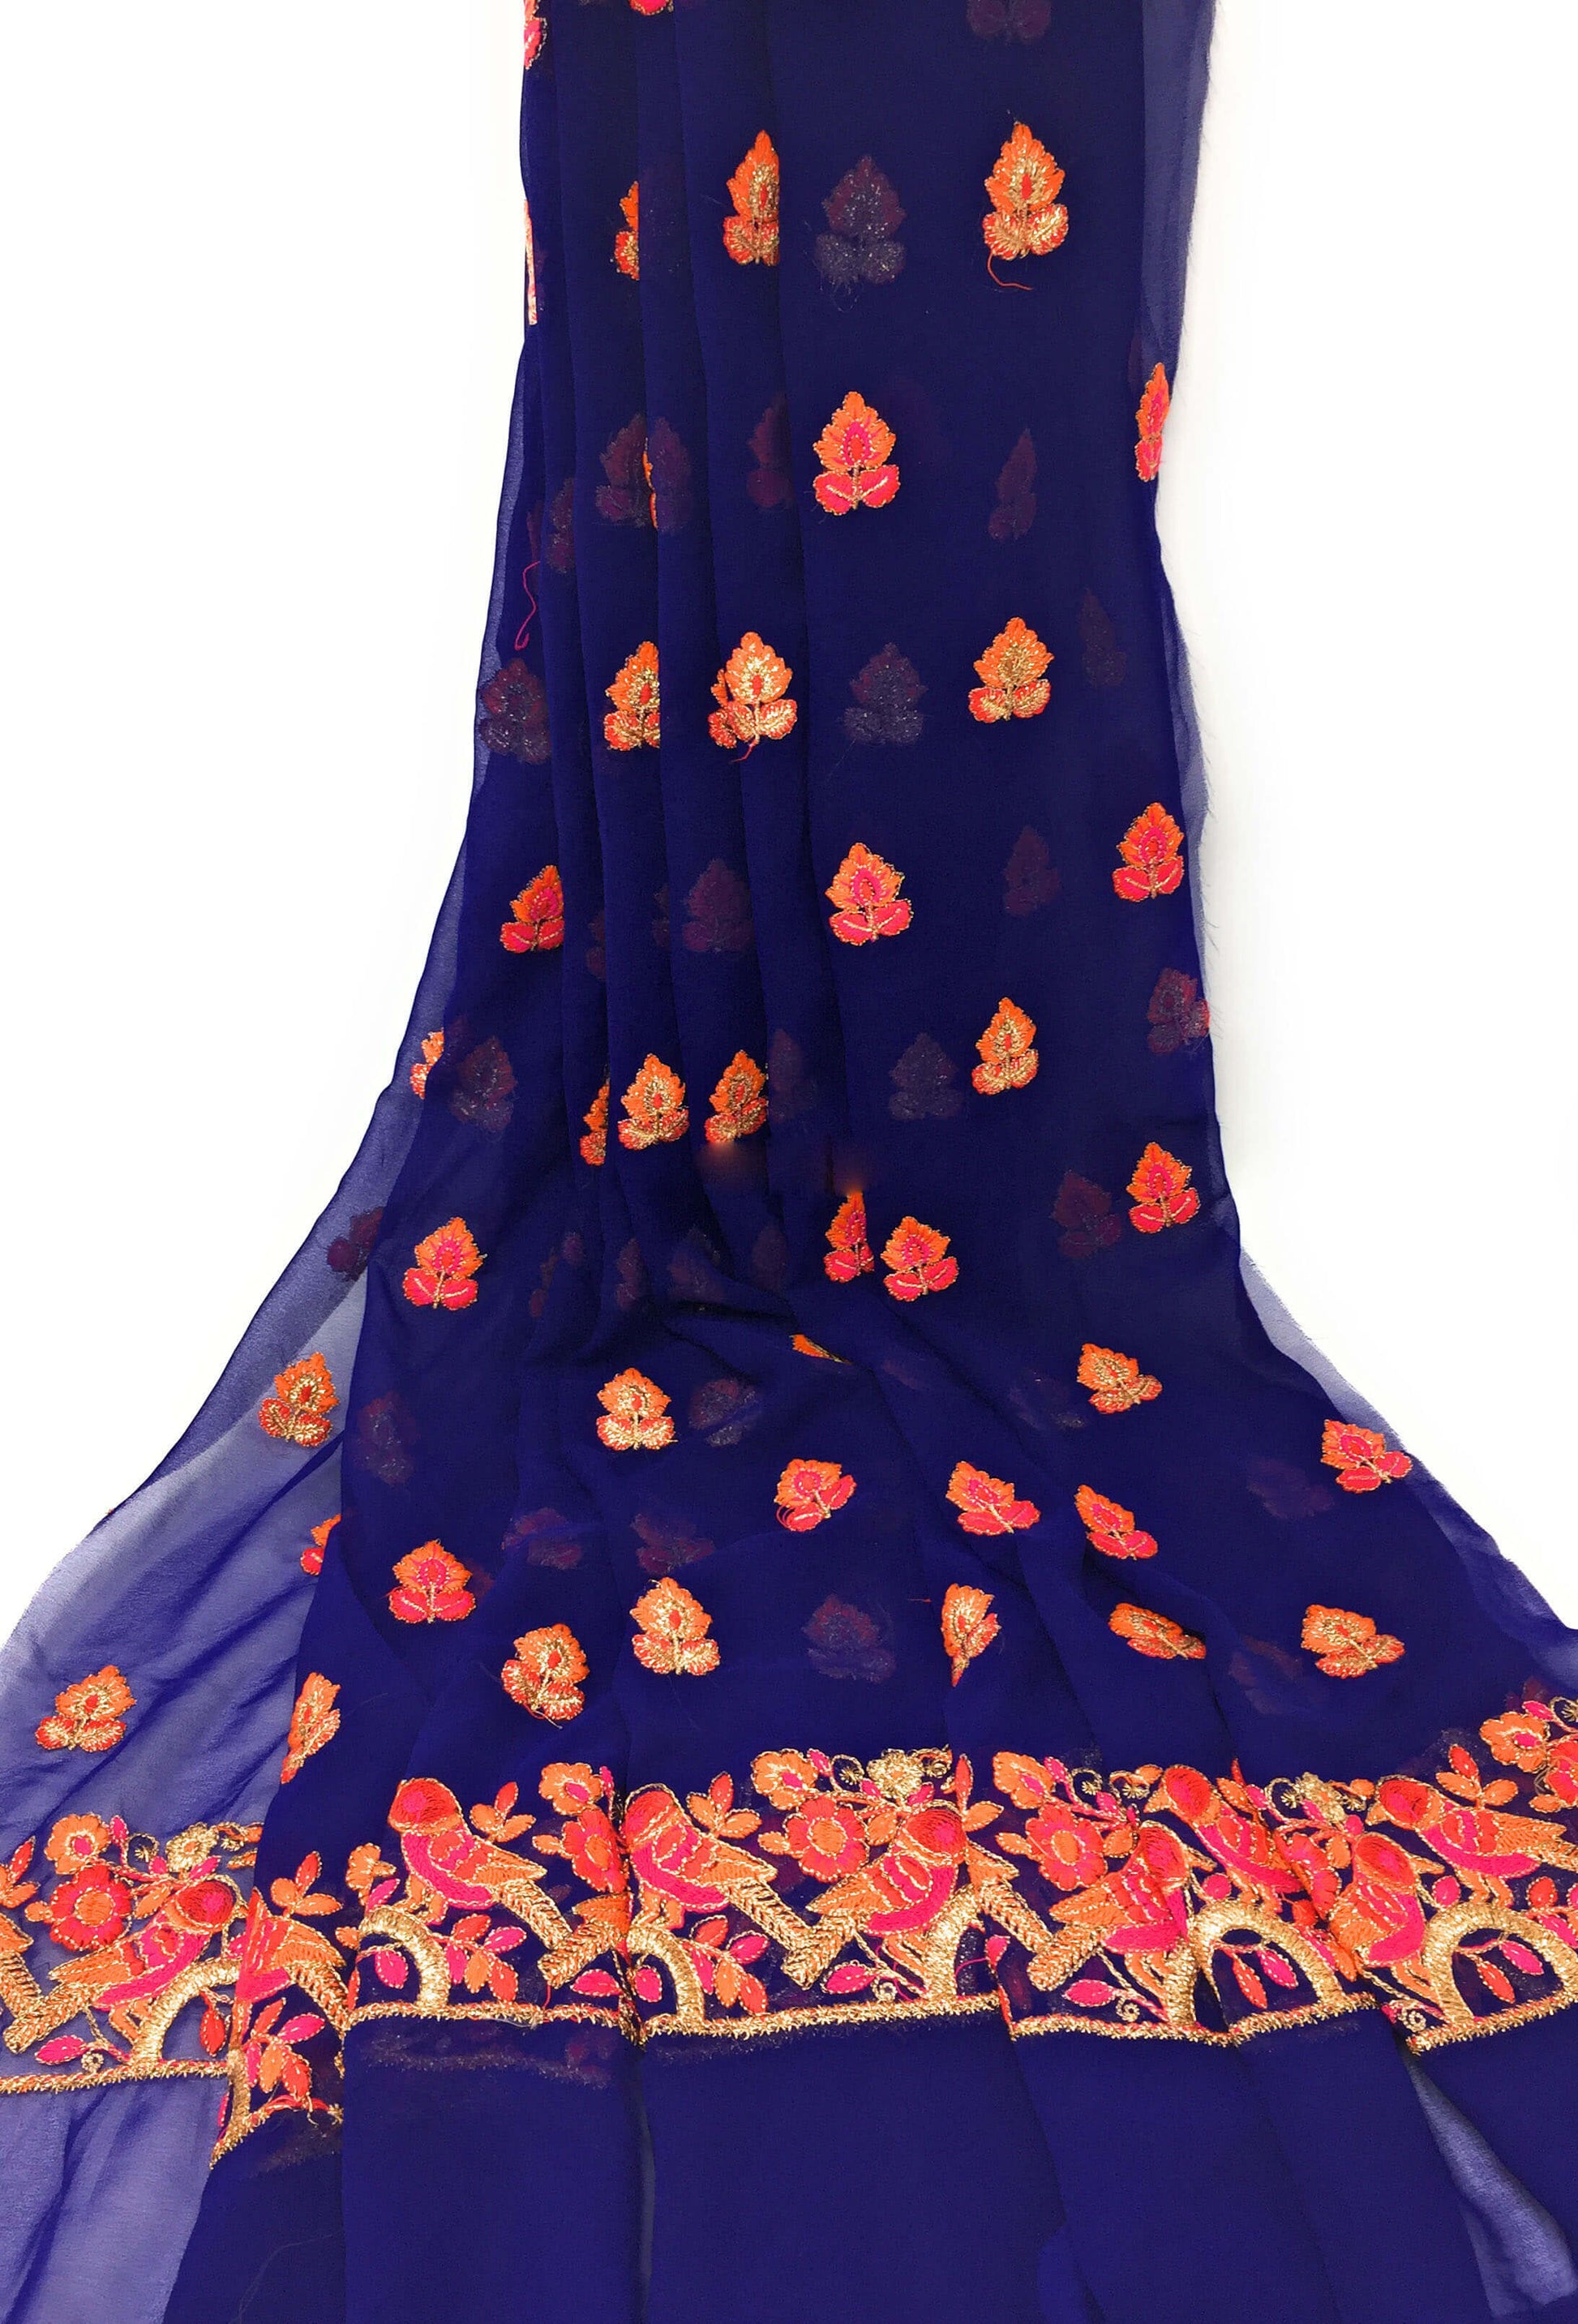 blouse cloth material online embroidery fabric Dark Blue, Pink, Red, Gold Georgette More than 60 inch wide wide 1627